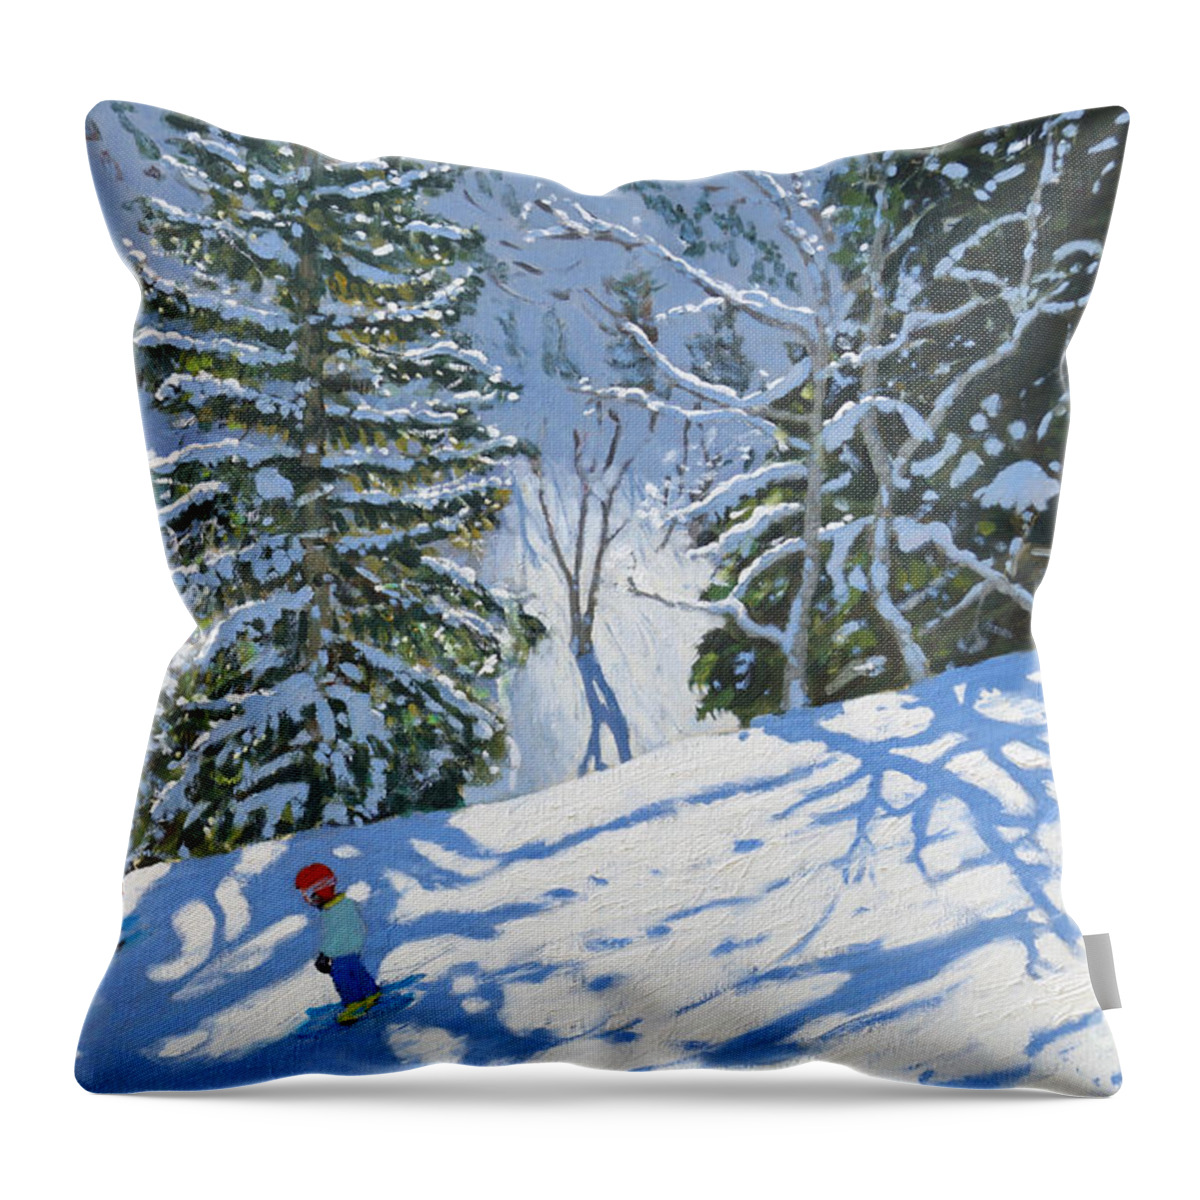 Skiing Courchevel To La Tania Throw Pillow featuring the painting Skiing Courchevel to La Tania by Andrew Macara